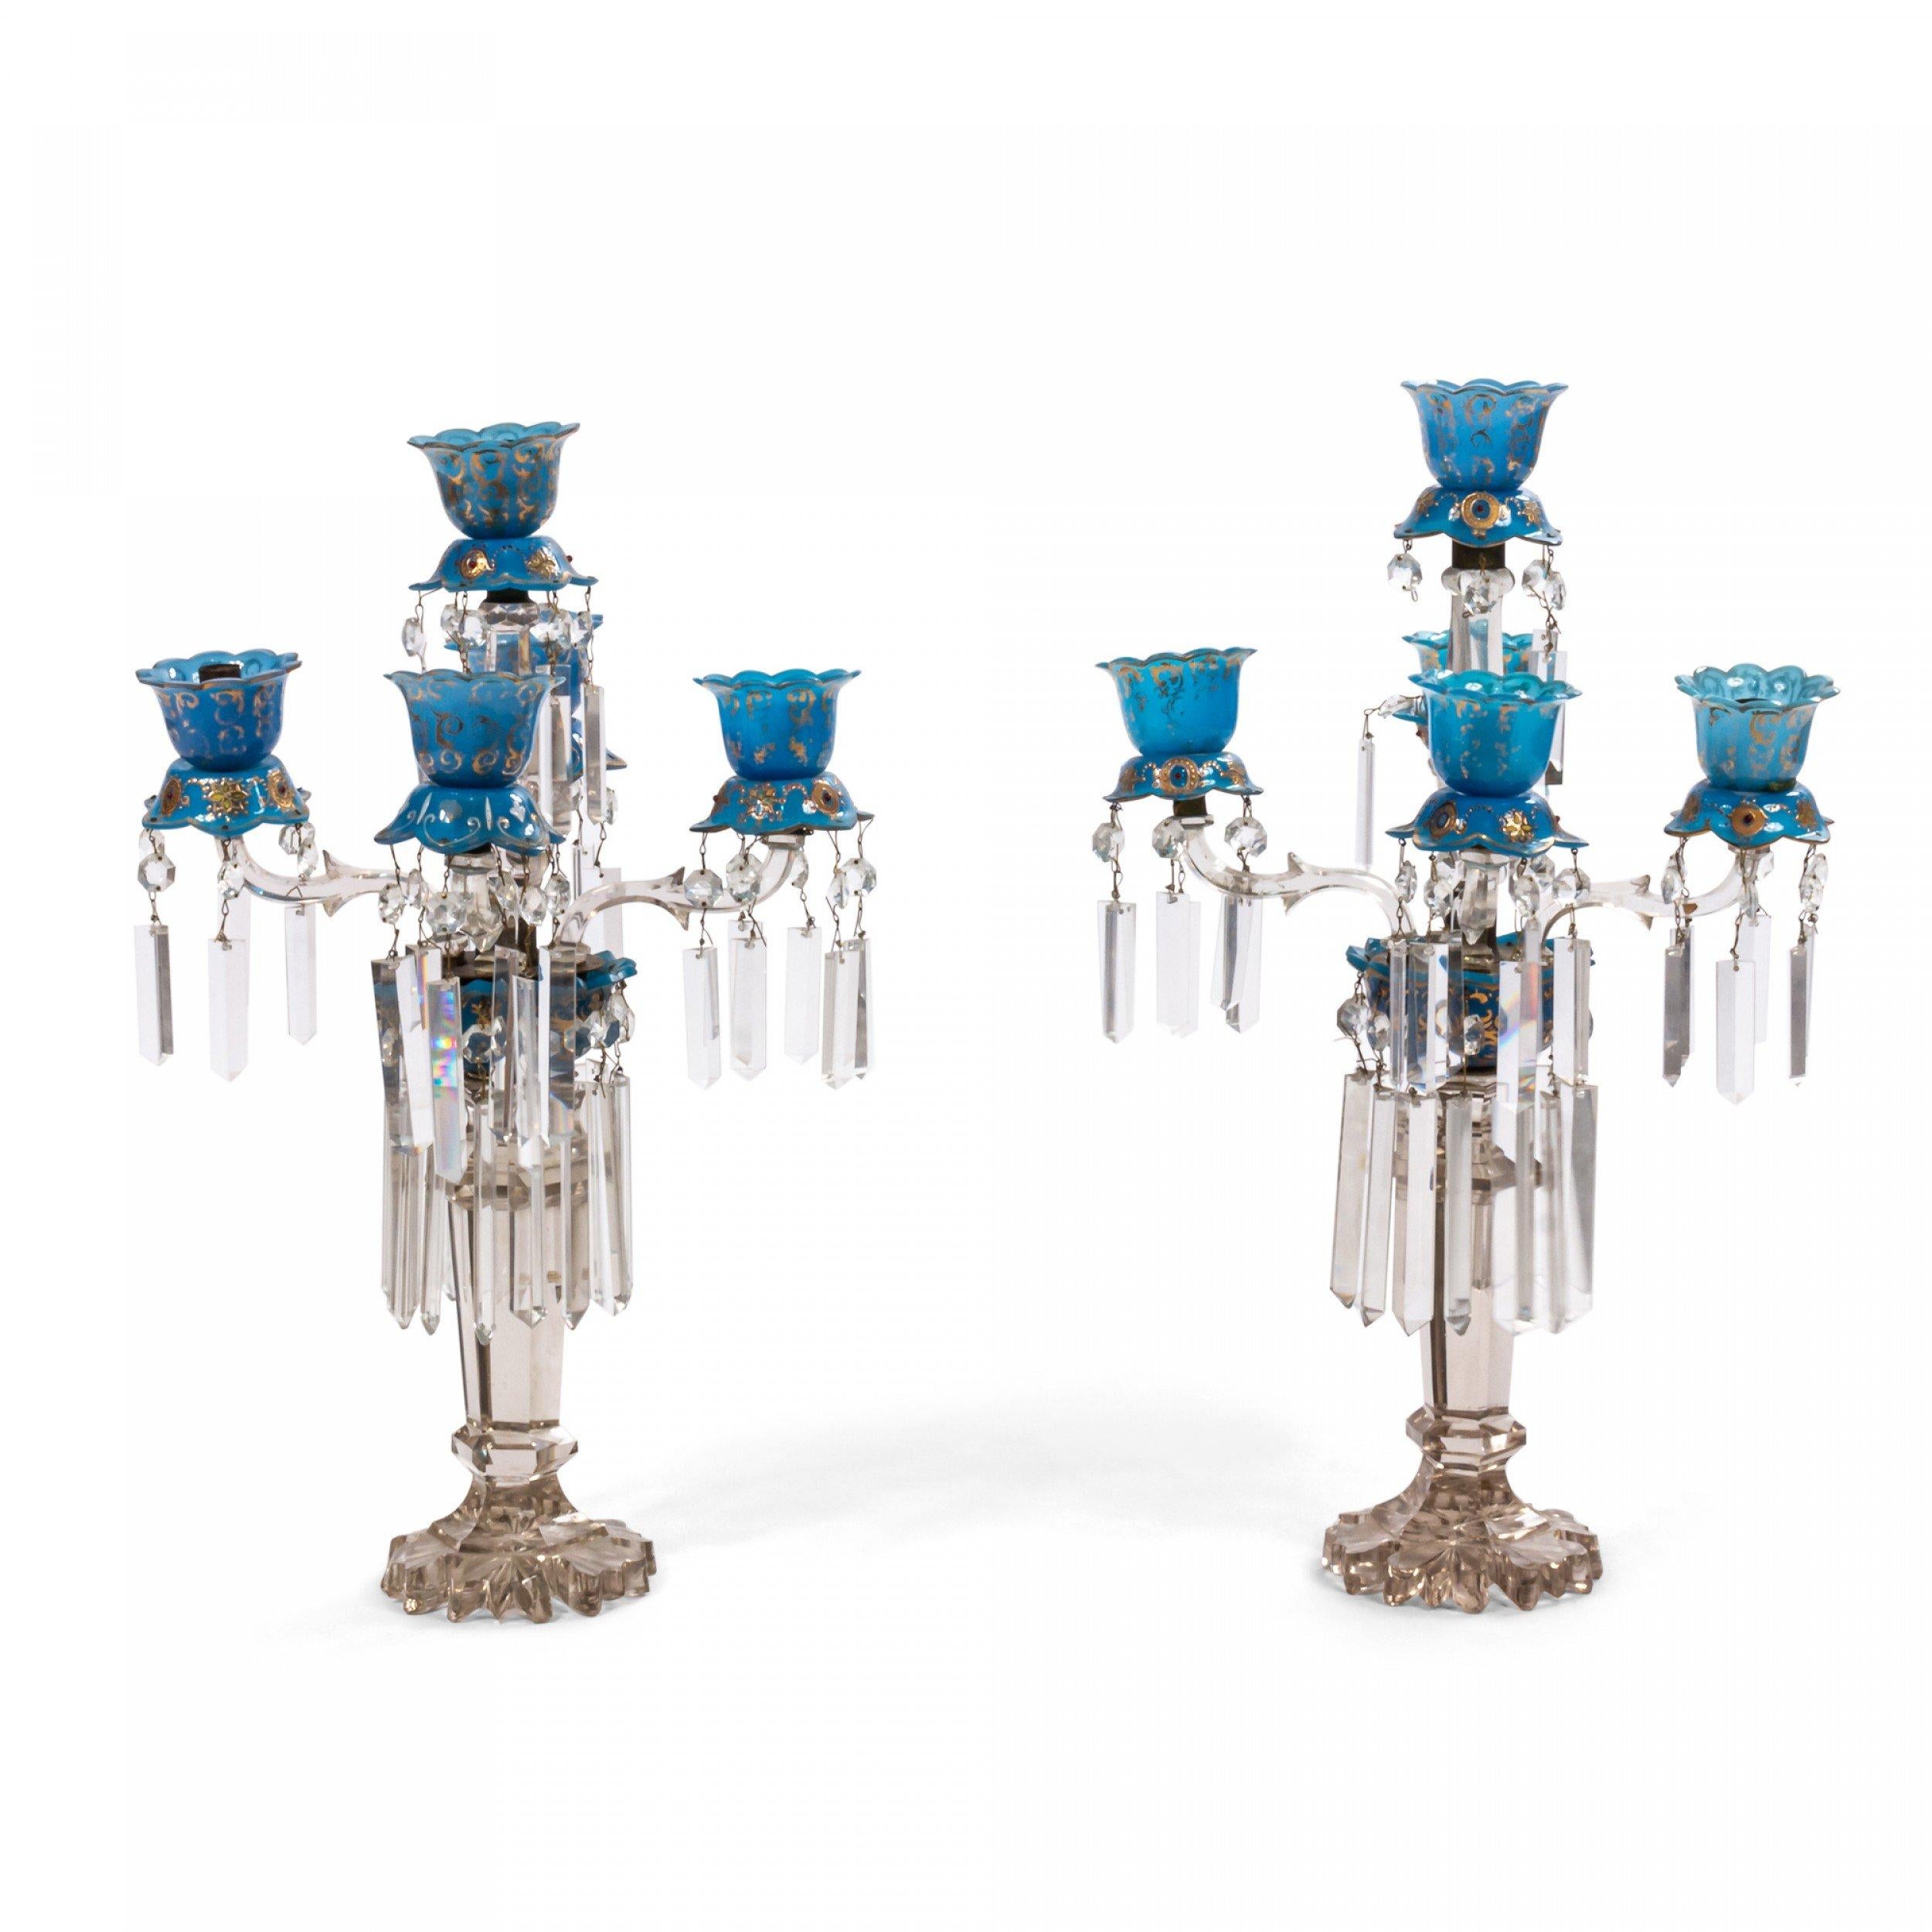 Pair of similar English Victorian crystal and blue opaline Waterford style 5 arm candelabras (PRICED AS Pair)
